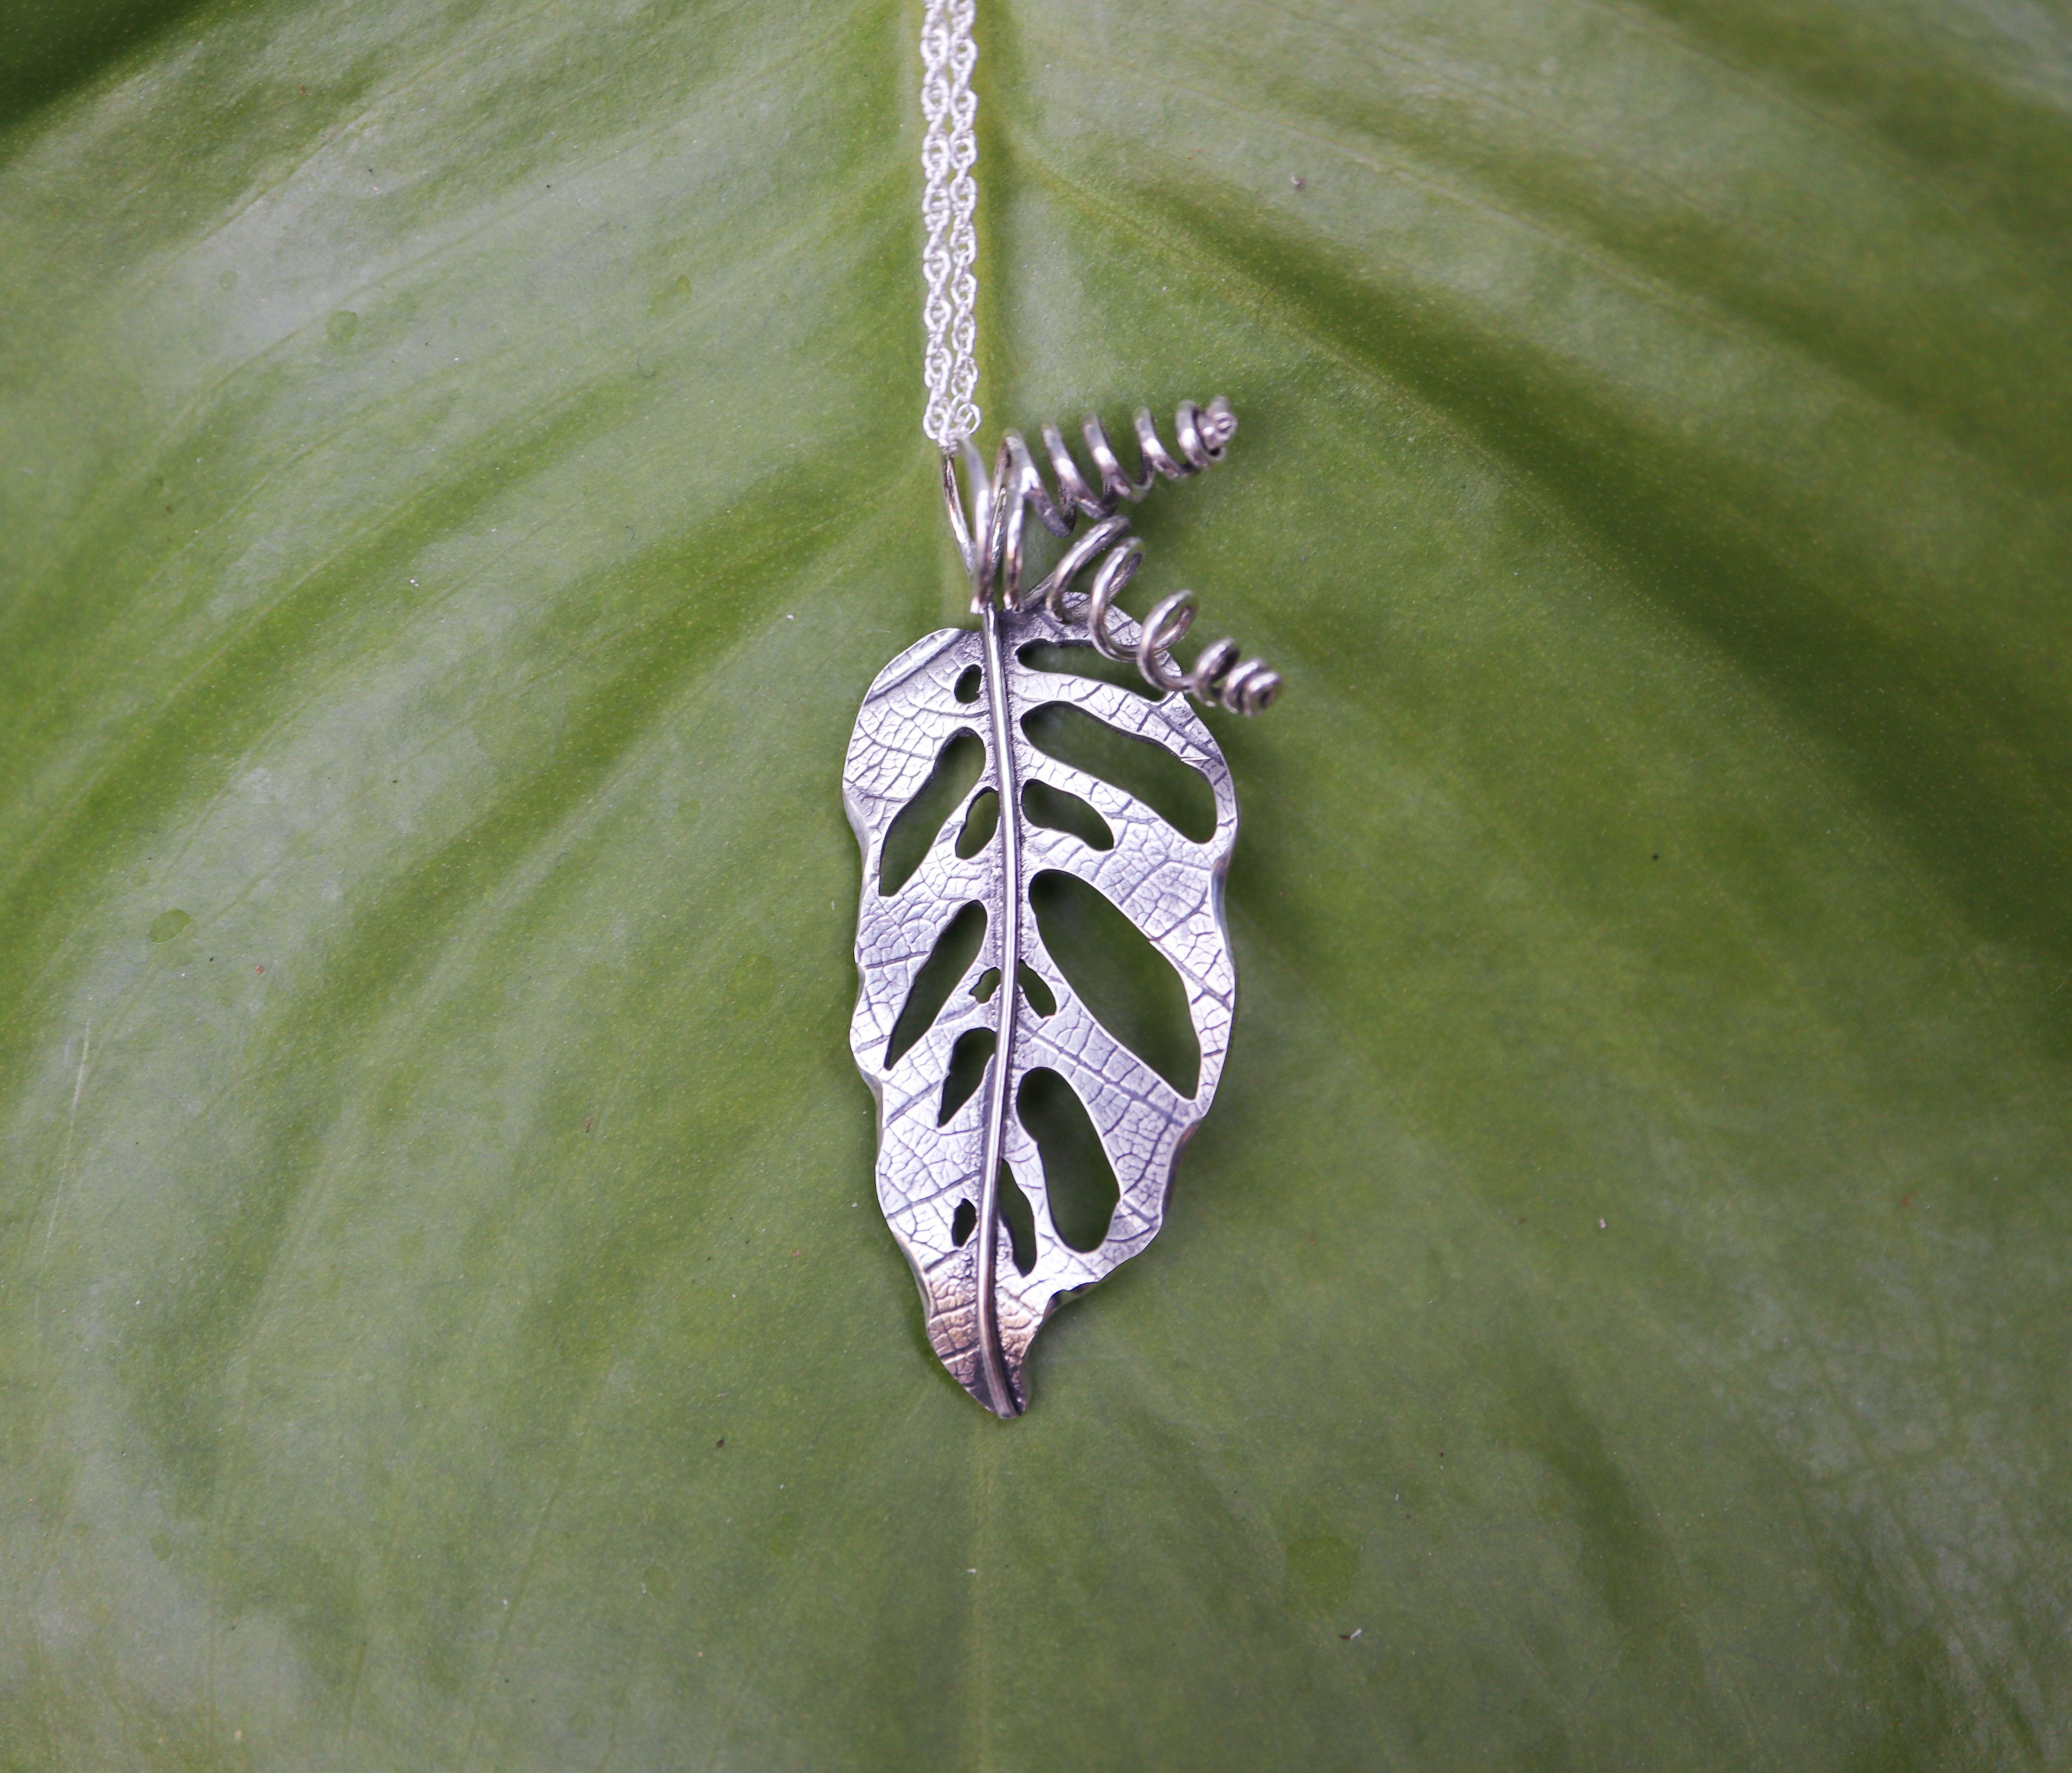 a handmade sterling silver monstera adansonii pendant on a necklace shown in front of a green leaf